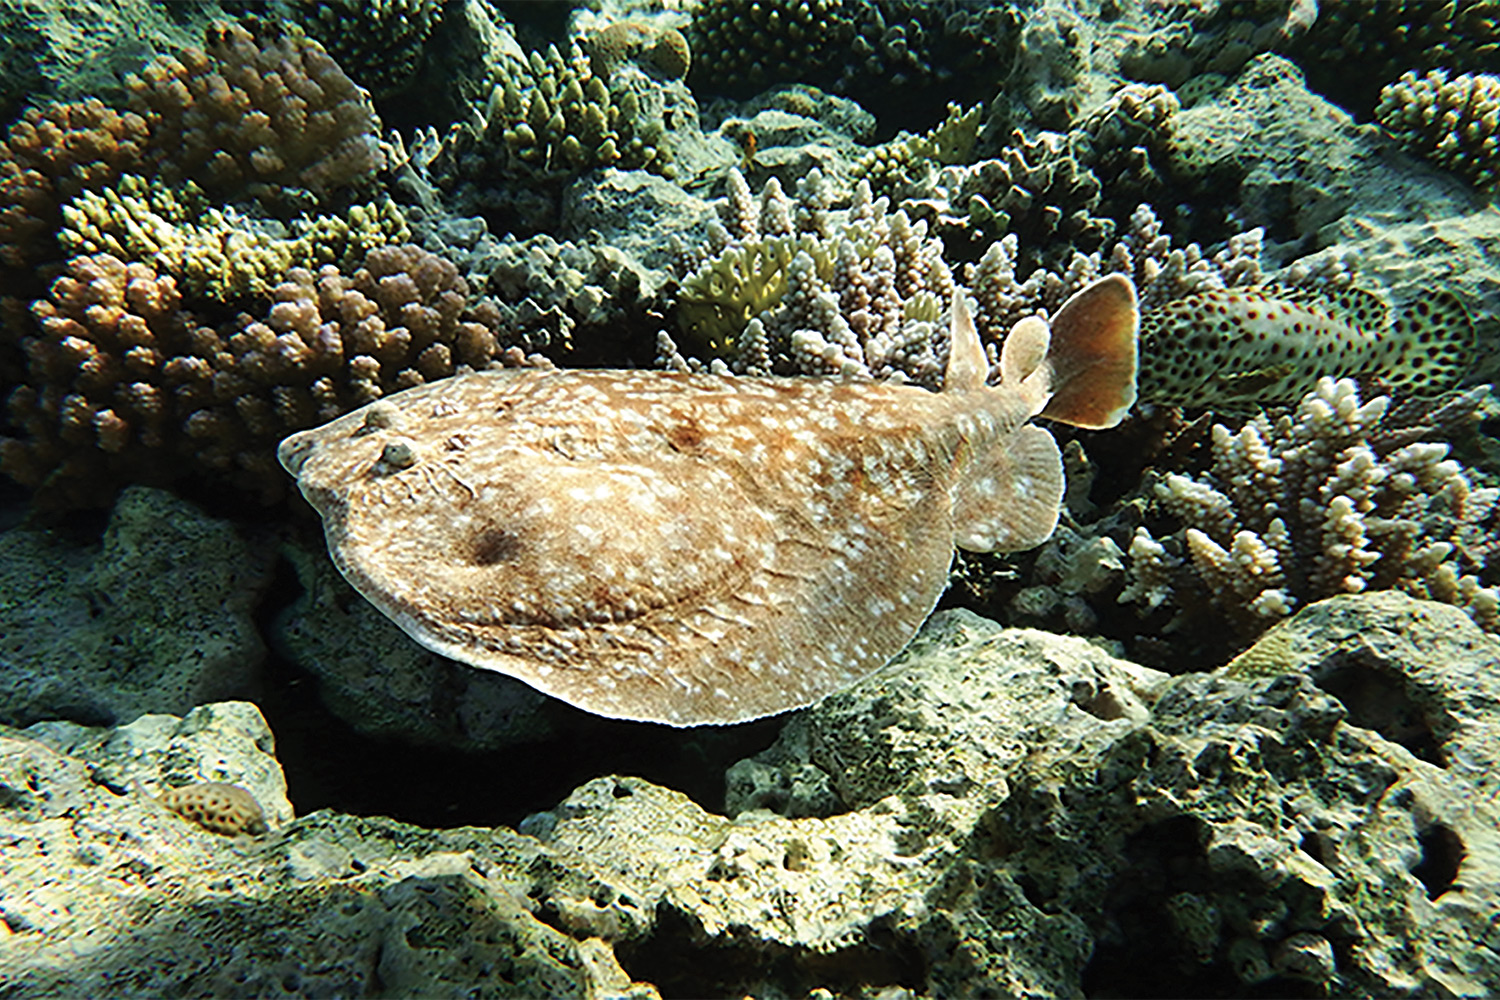 Leopard Electric Ray on Reef